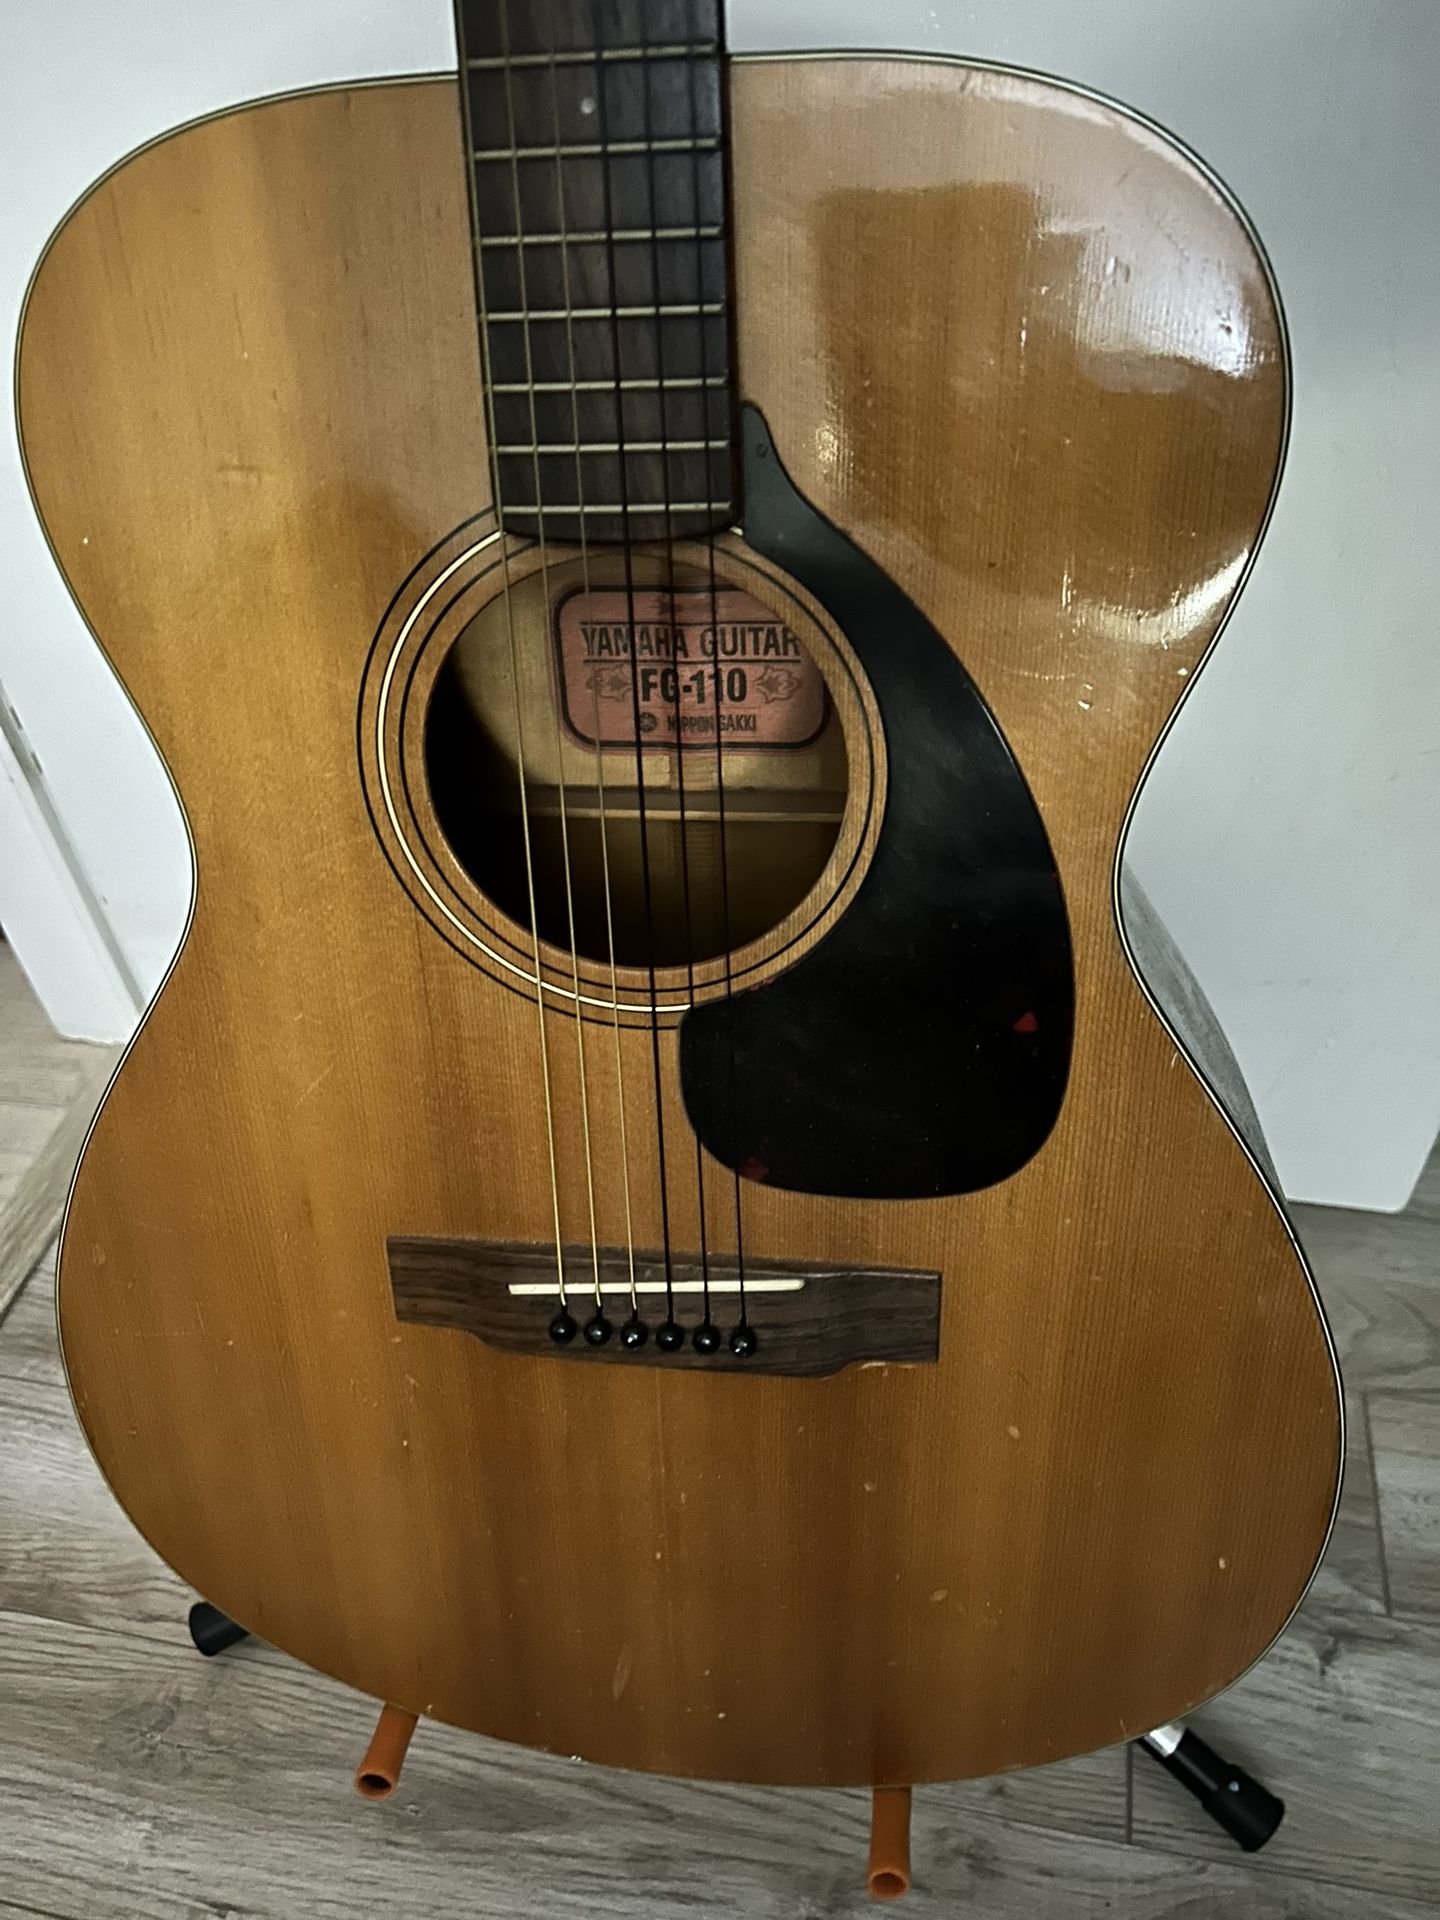 1960s Red Label Yahama FG-110 Acoustic Guitar (with stand)